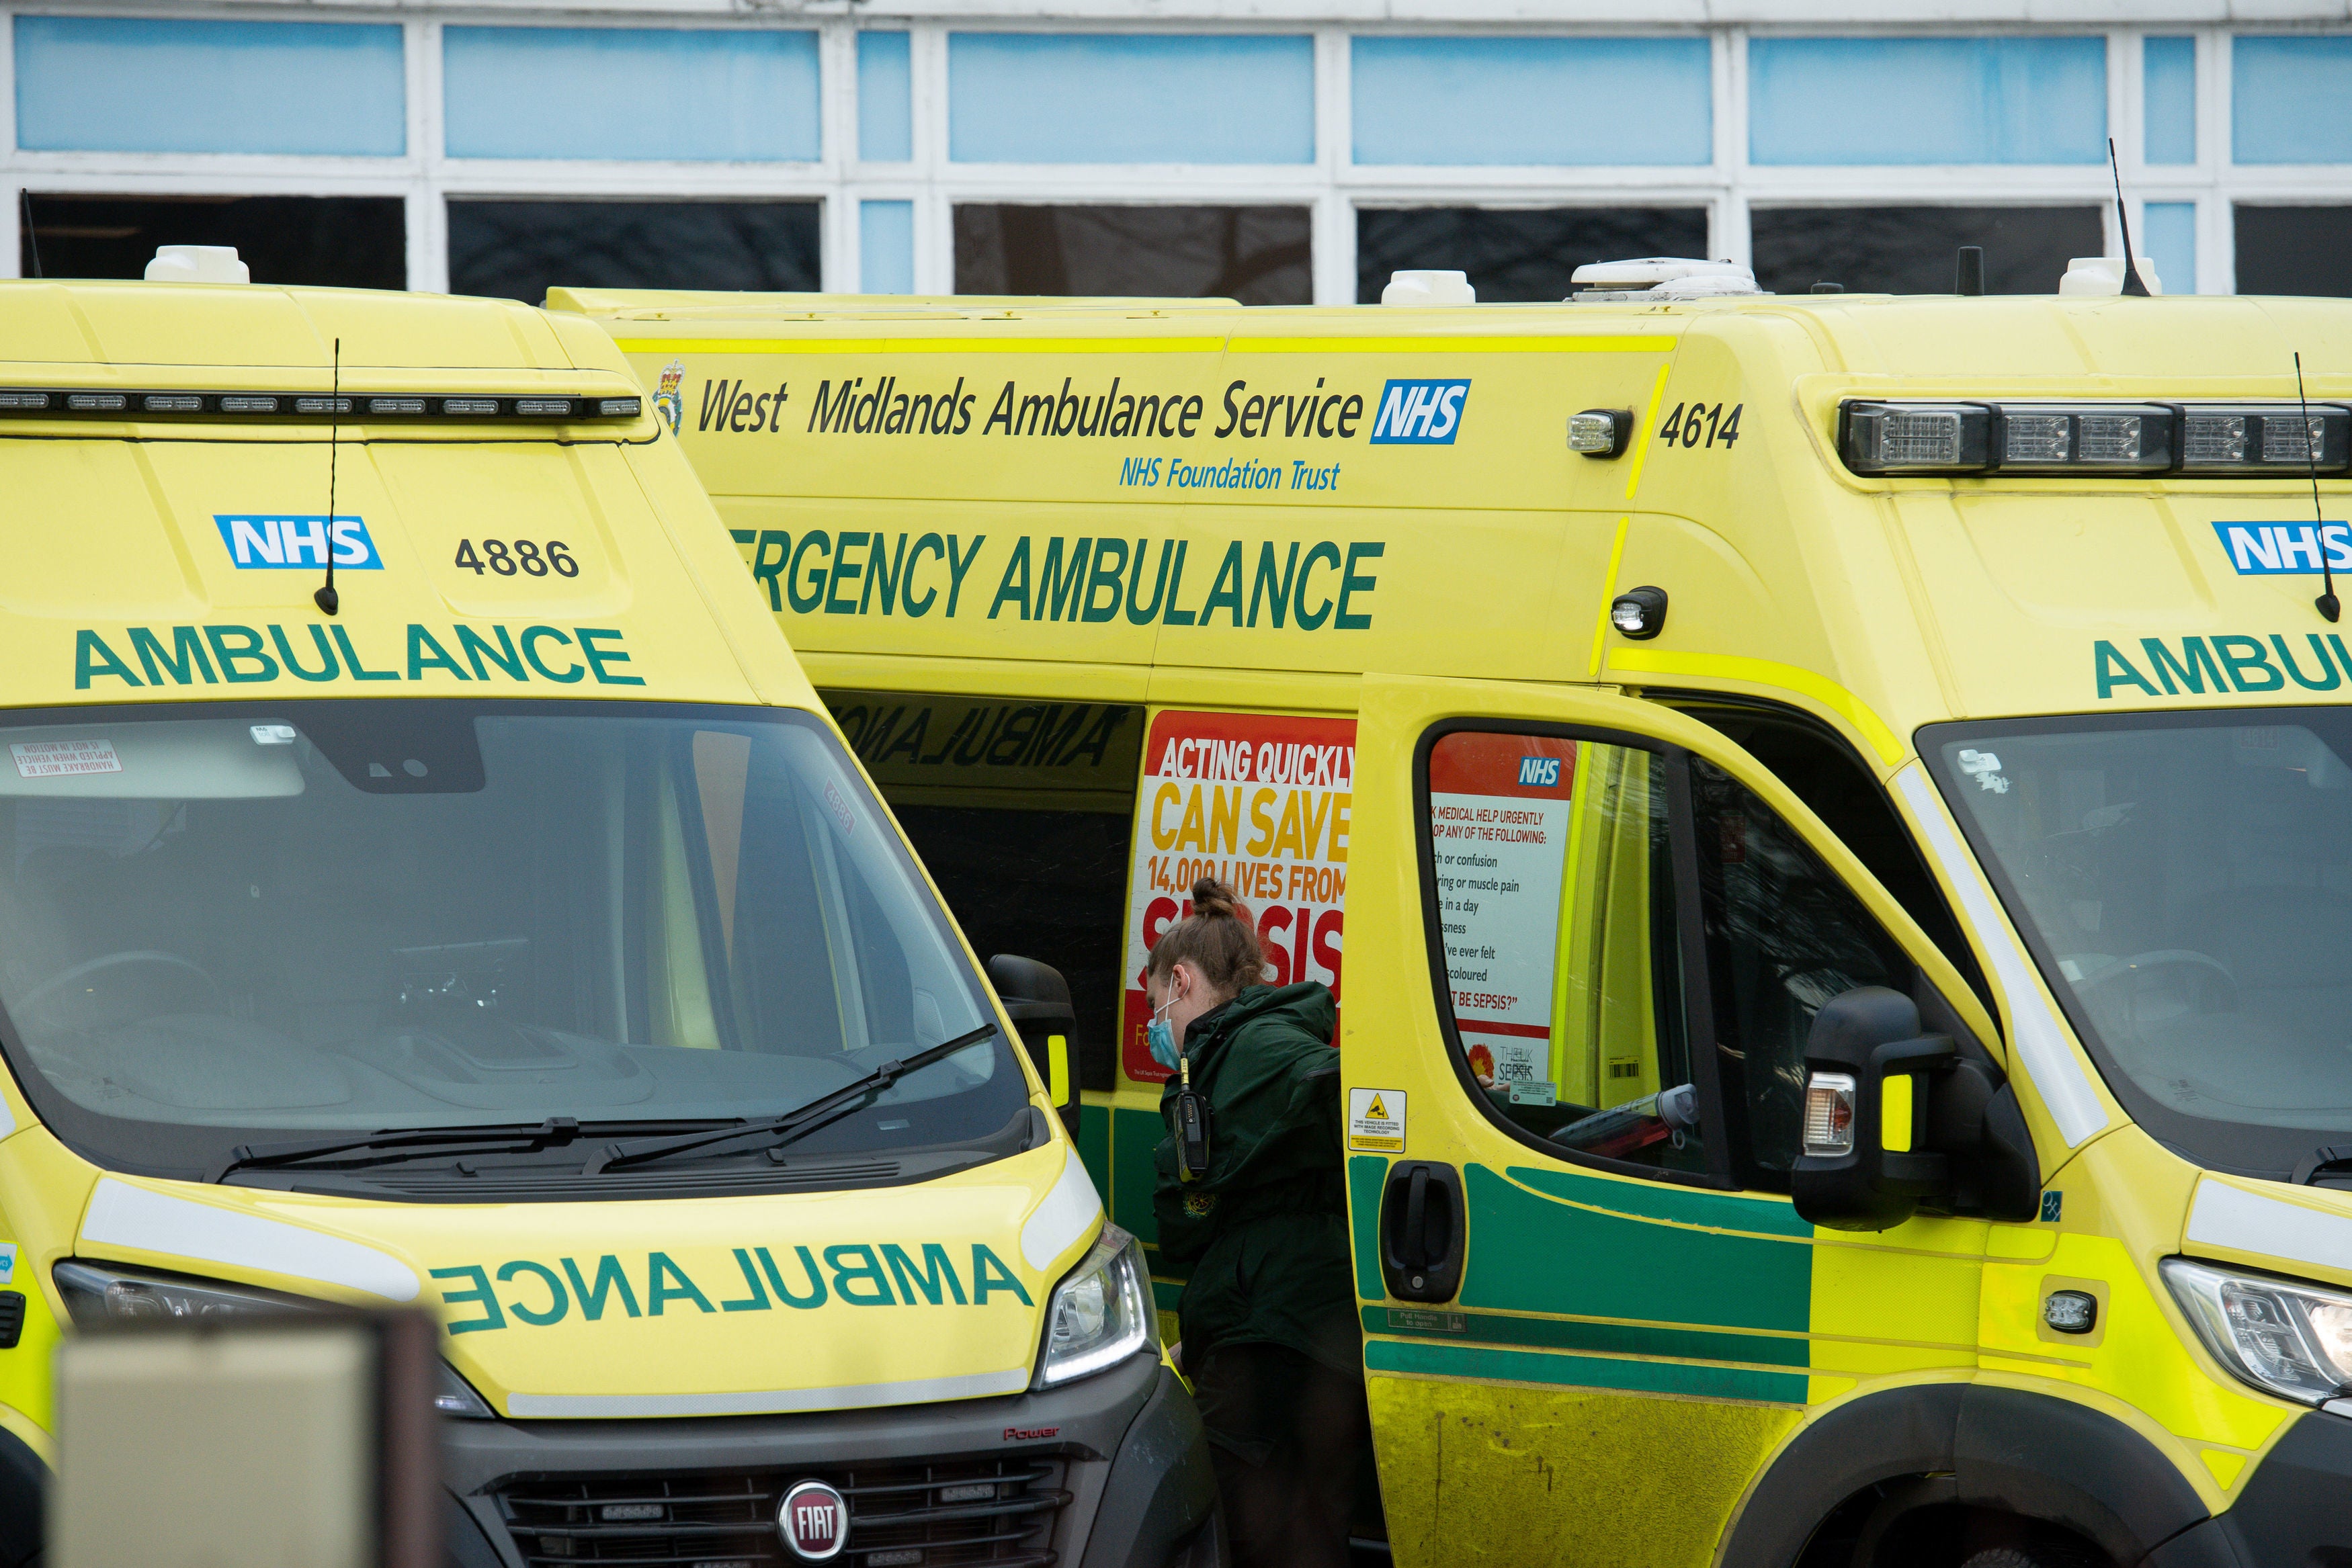 Patients forced to wait in the back of ambulances due to Covid pressures